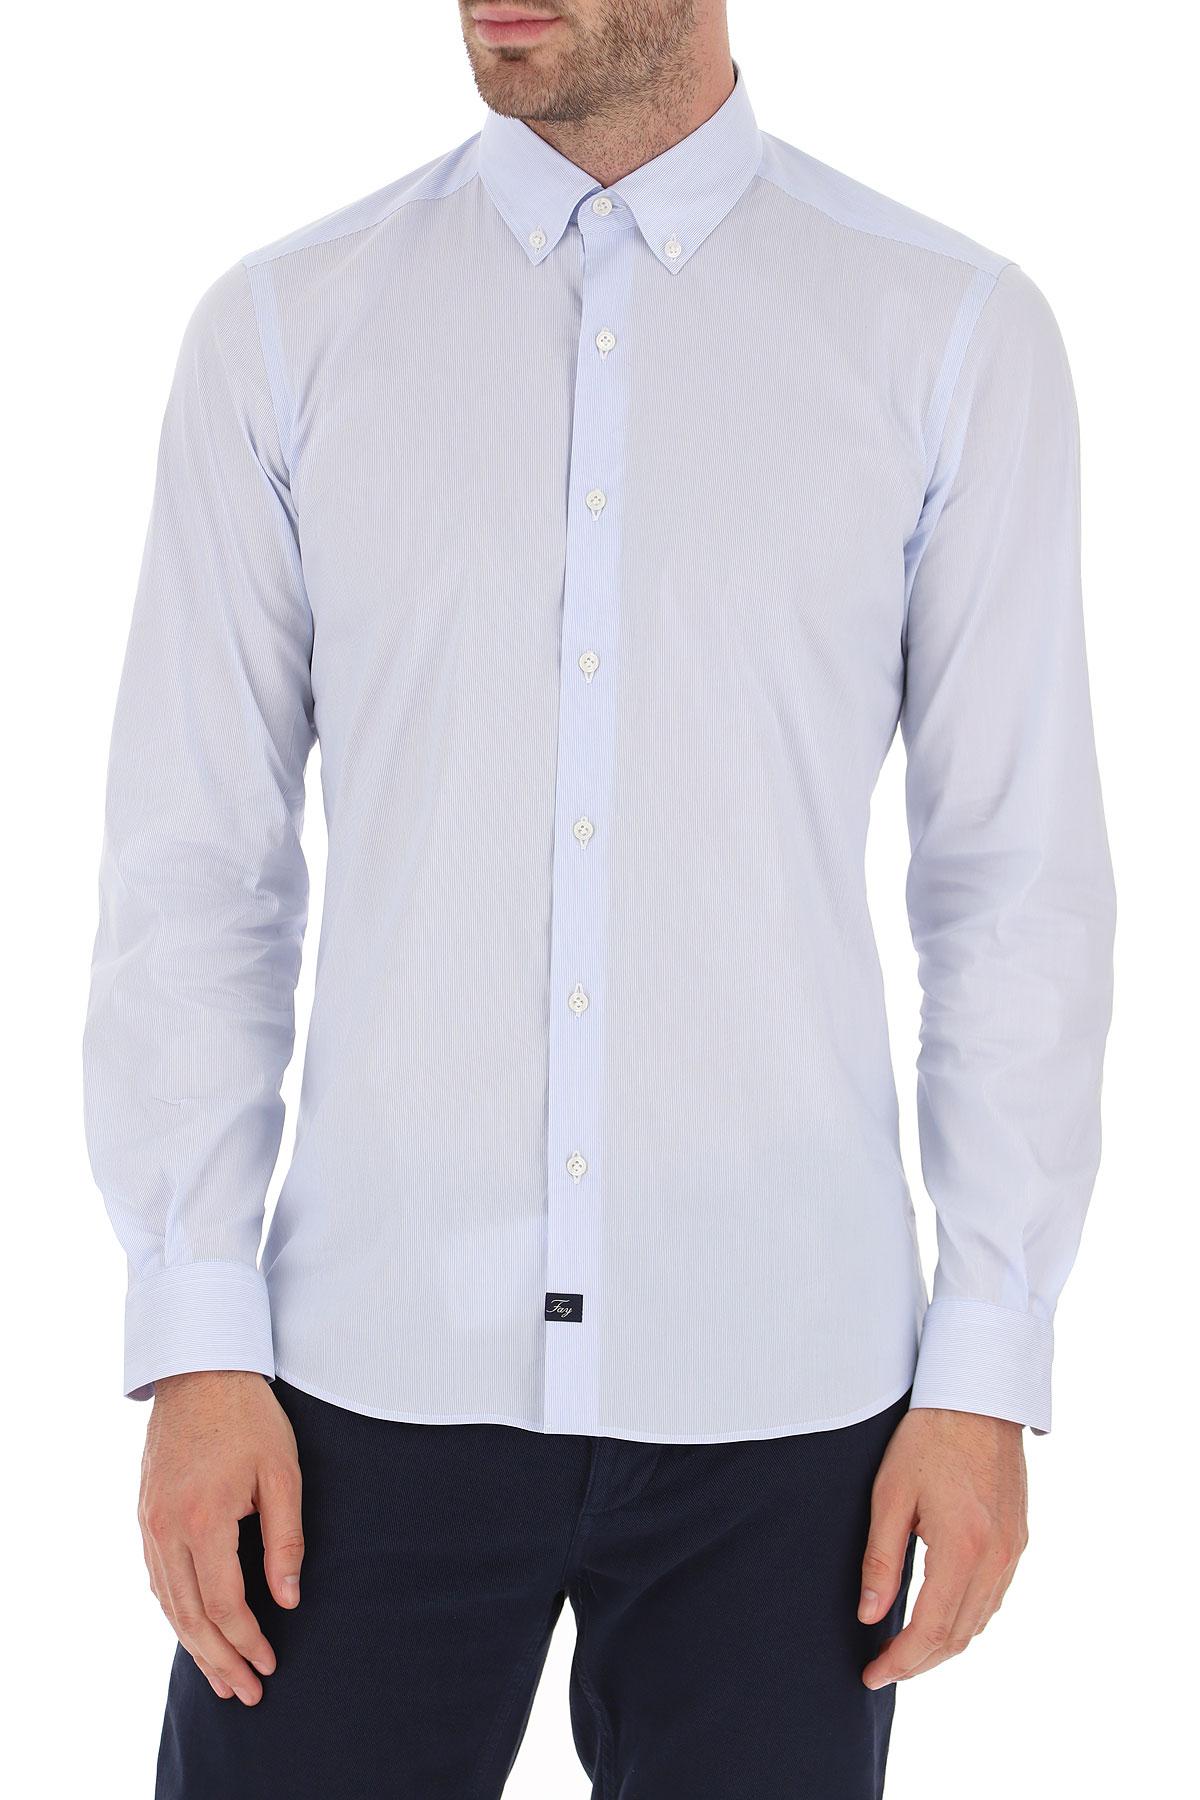 Fay Synthetic Shirt For Men in White for Men - Lyst